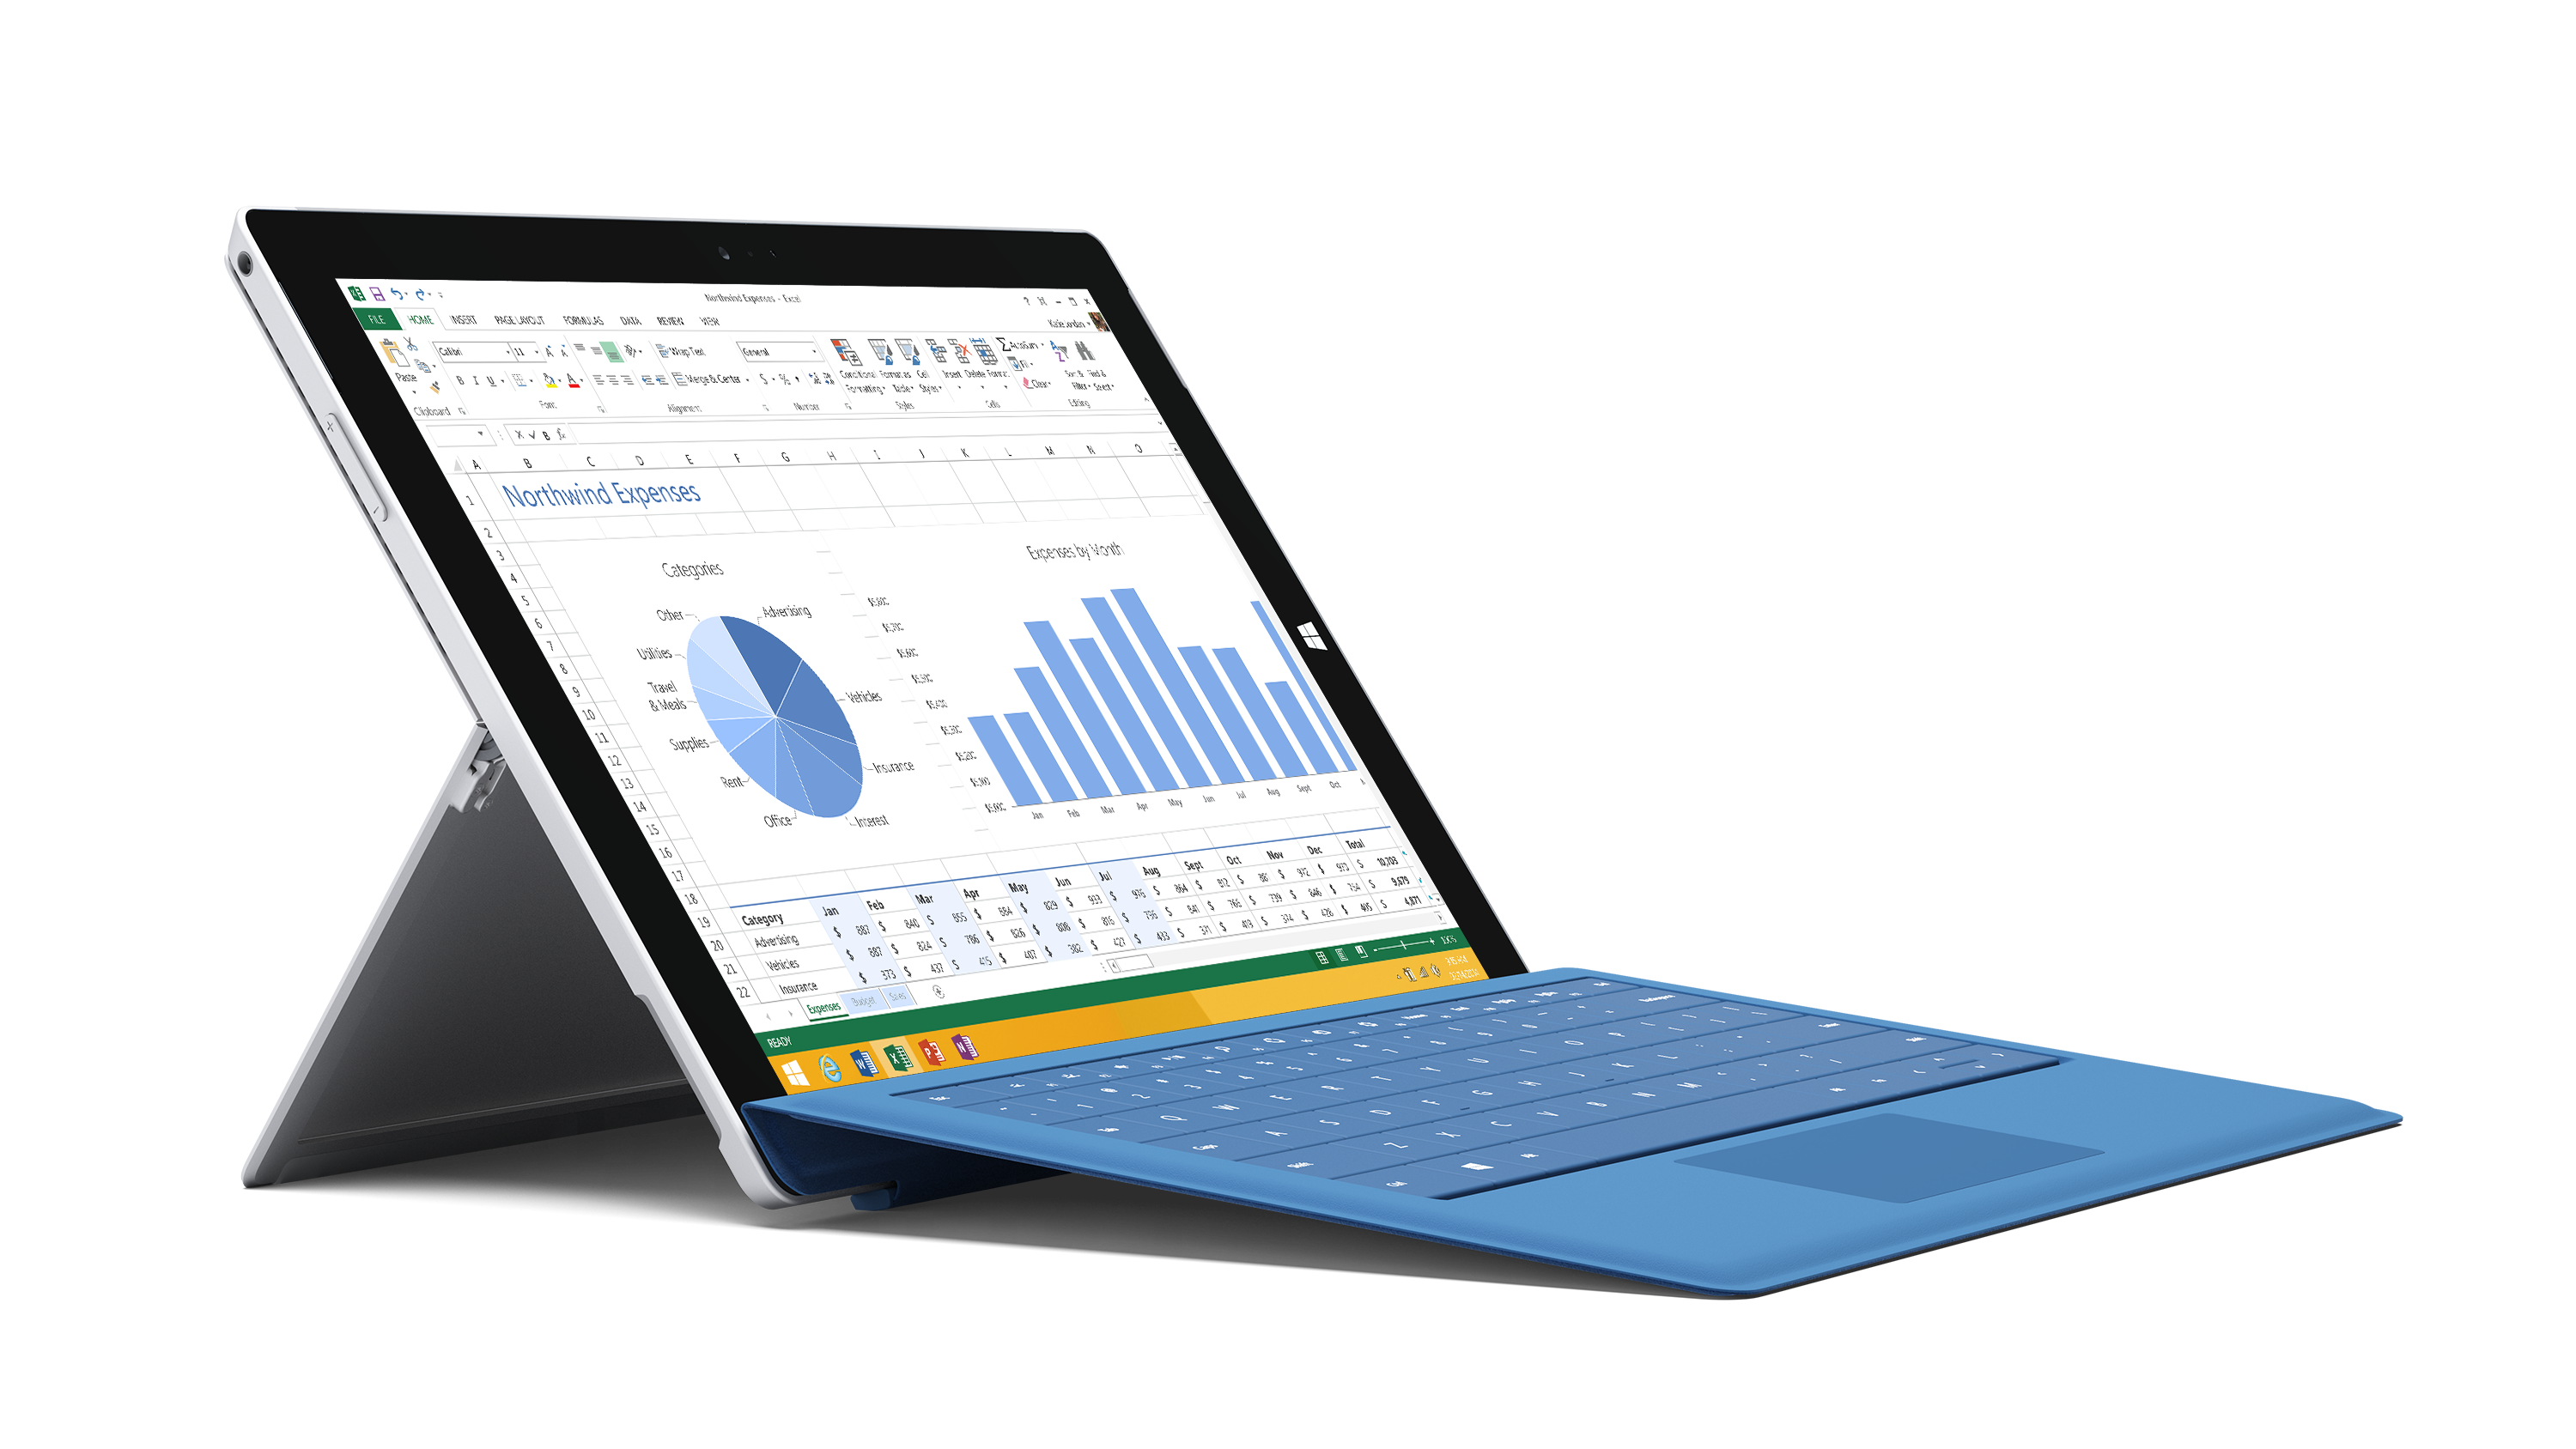 Surface Pro 3 launching in 25 Additional Markets on August 28th